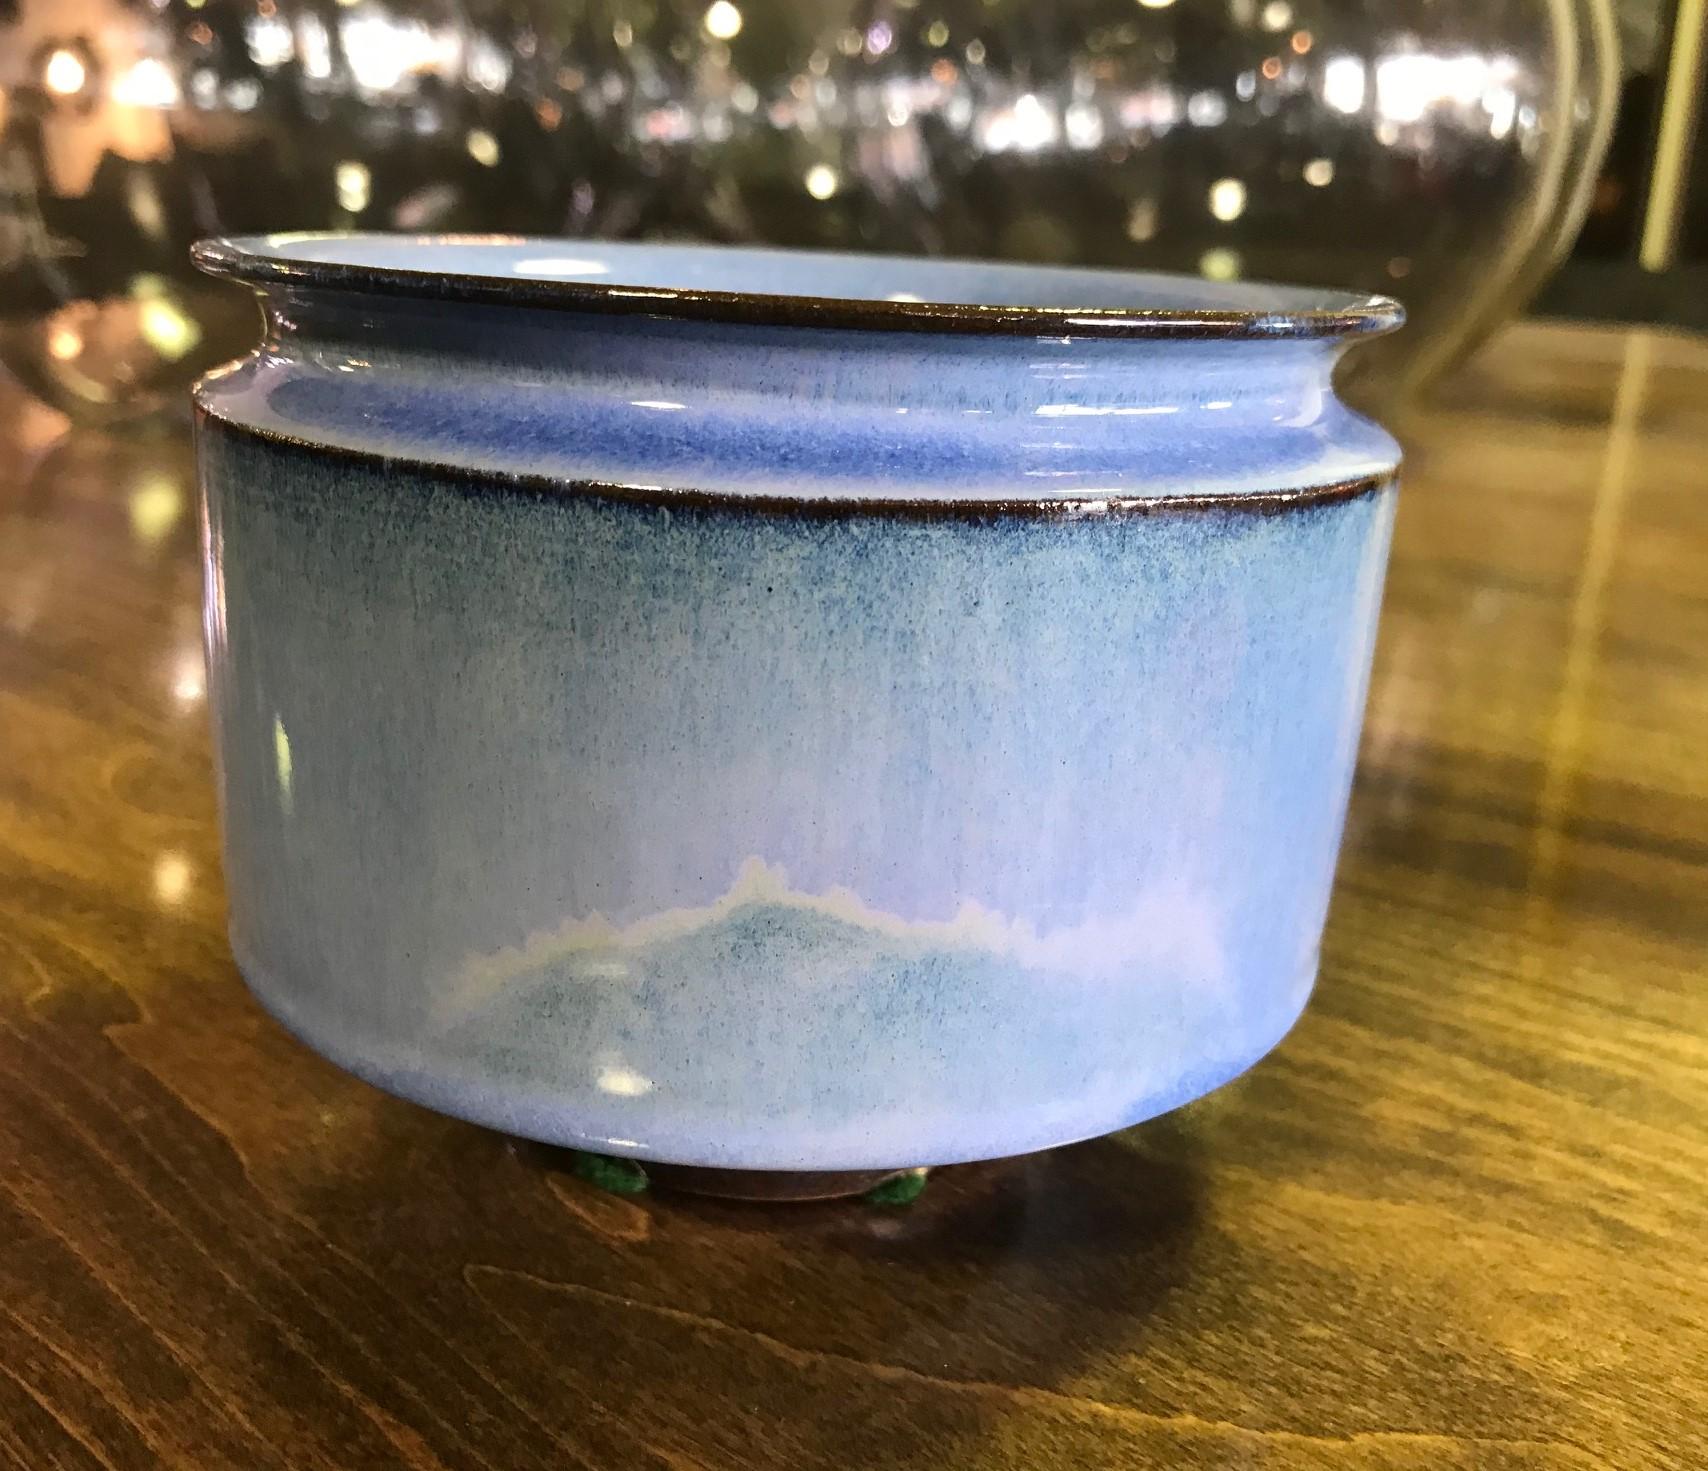 Another wonderfully glazed and rare shaped work by famed pottery masters Otto and Gertrud Natzler. This round light blue glazed bowl has a beveled rim and design which tapers towards the bottom into a narrow round foot. The bowl glows in the light.